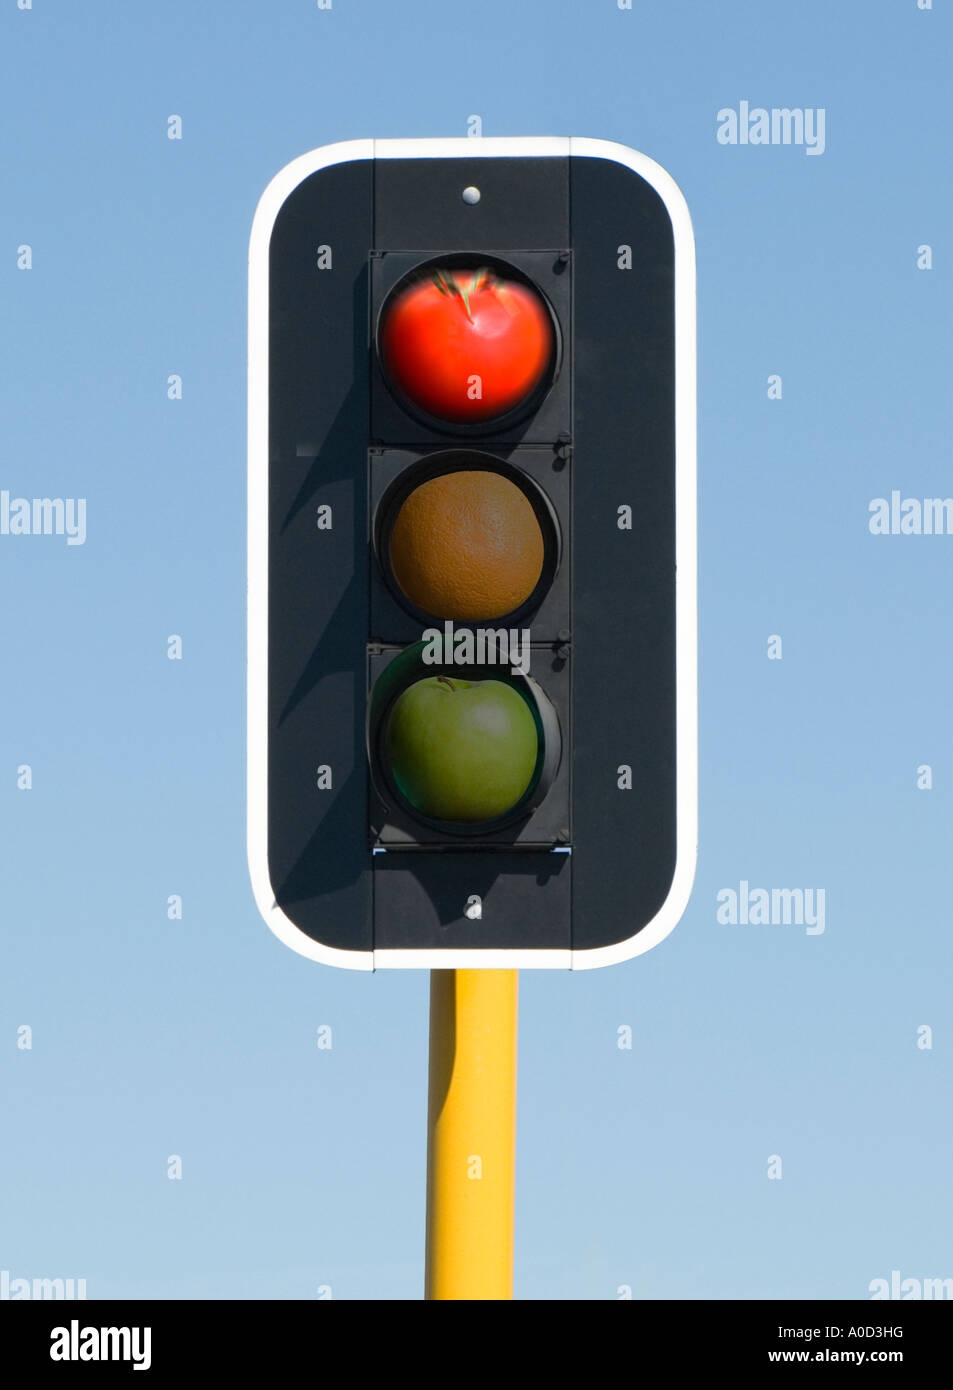 Fruit and Veg traffic lights red lit healthy eating food labelling Stock Photo